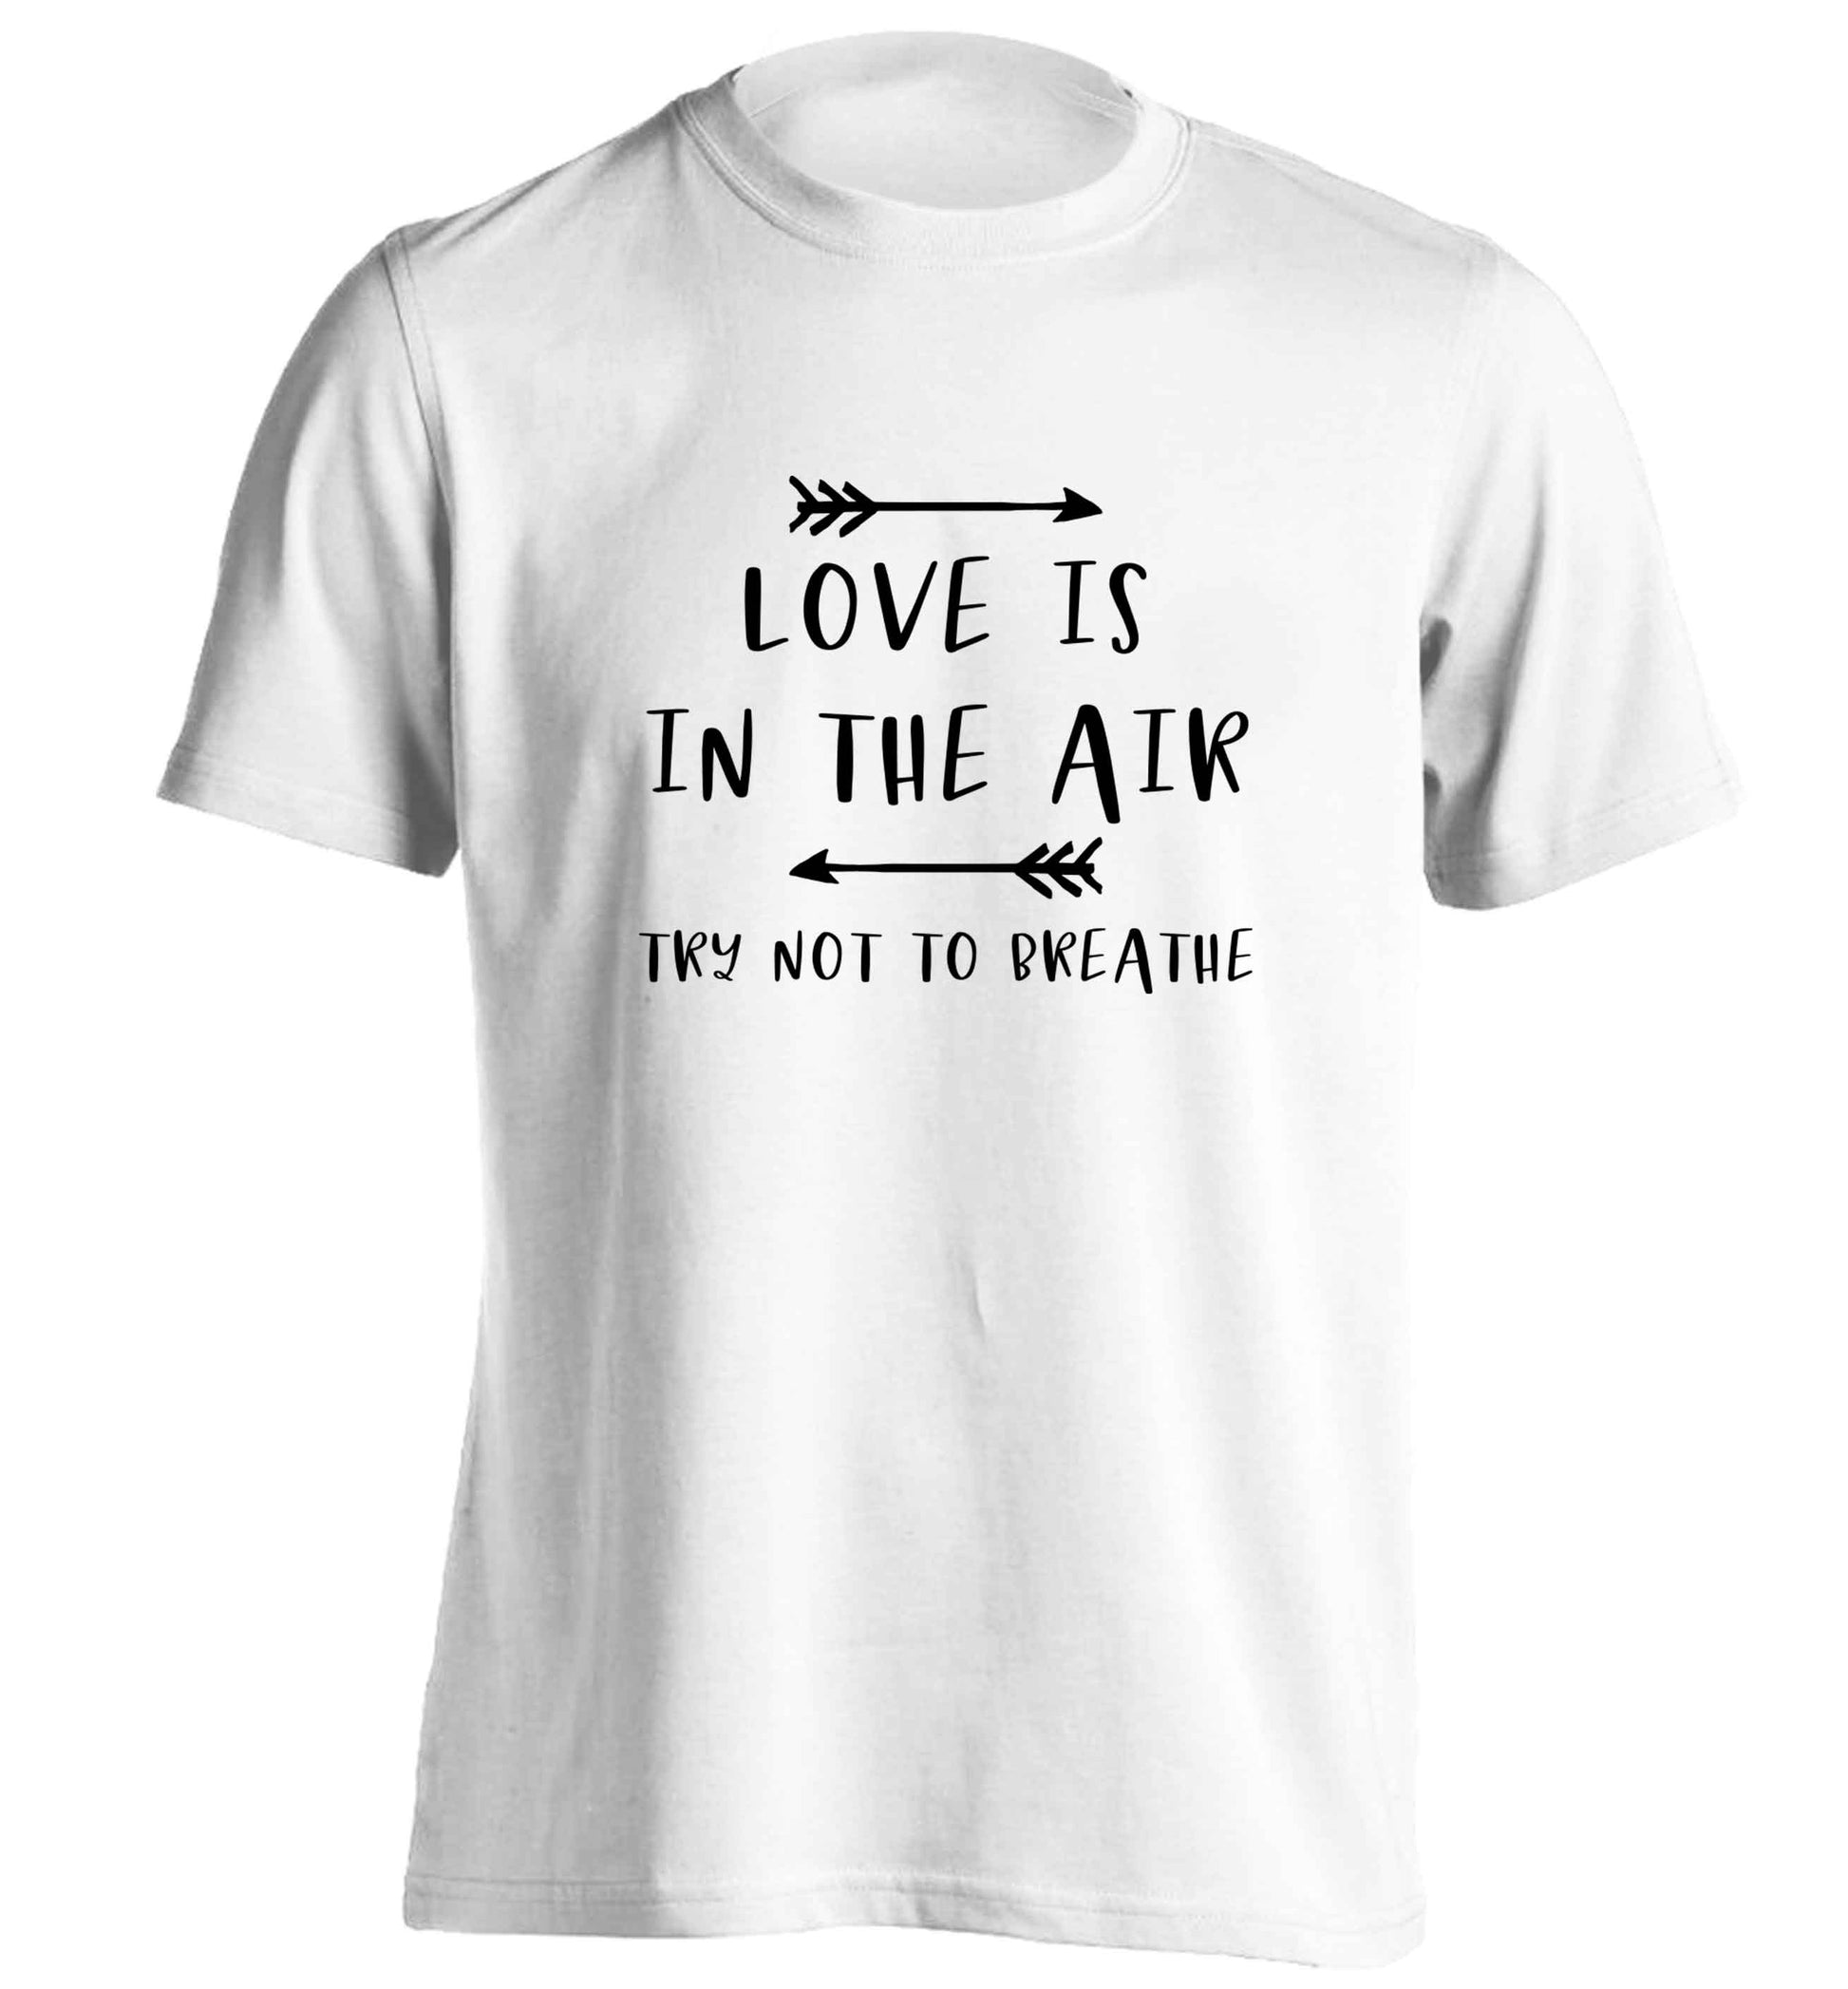 Love is in the air try not to breathe adults unisex white Tshirt 2XL